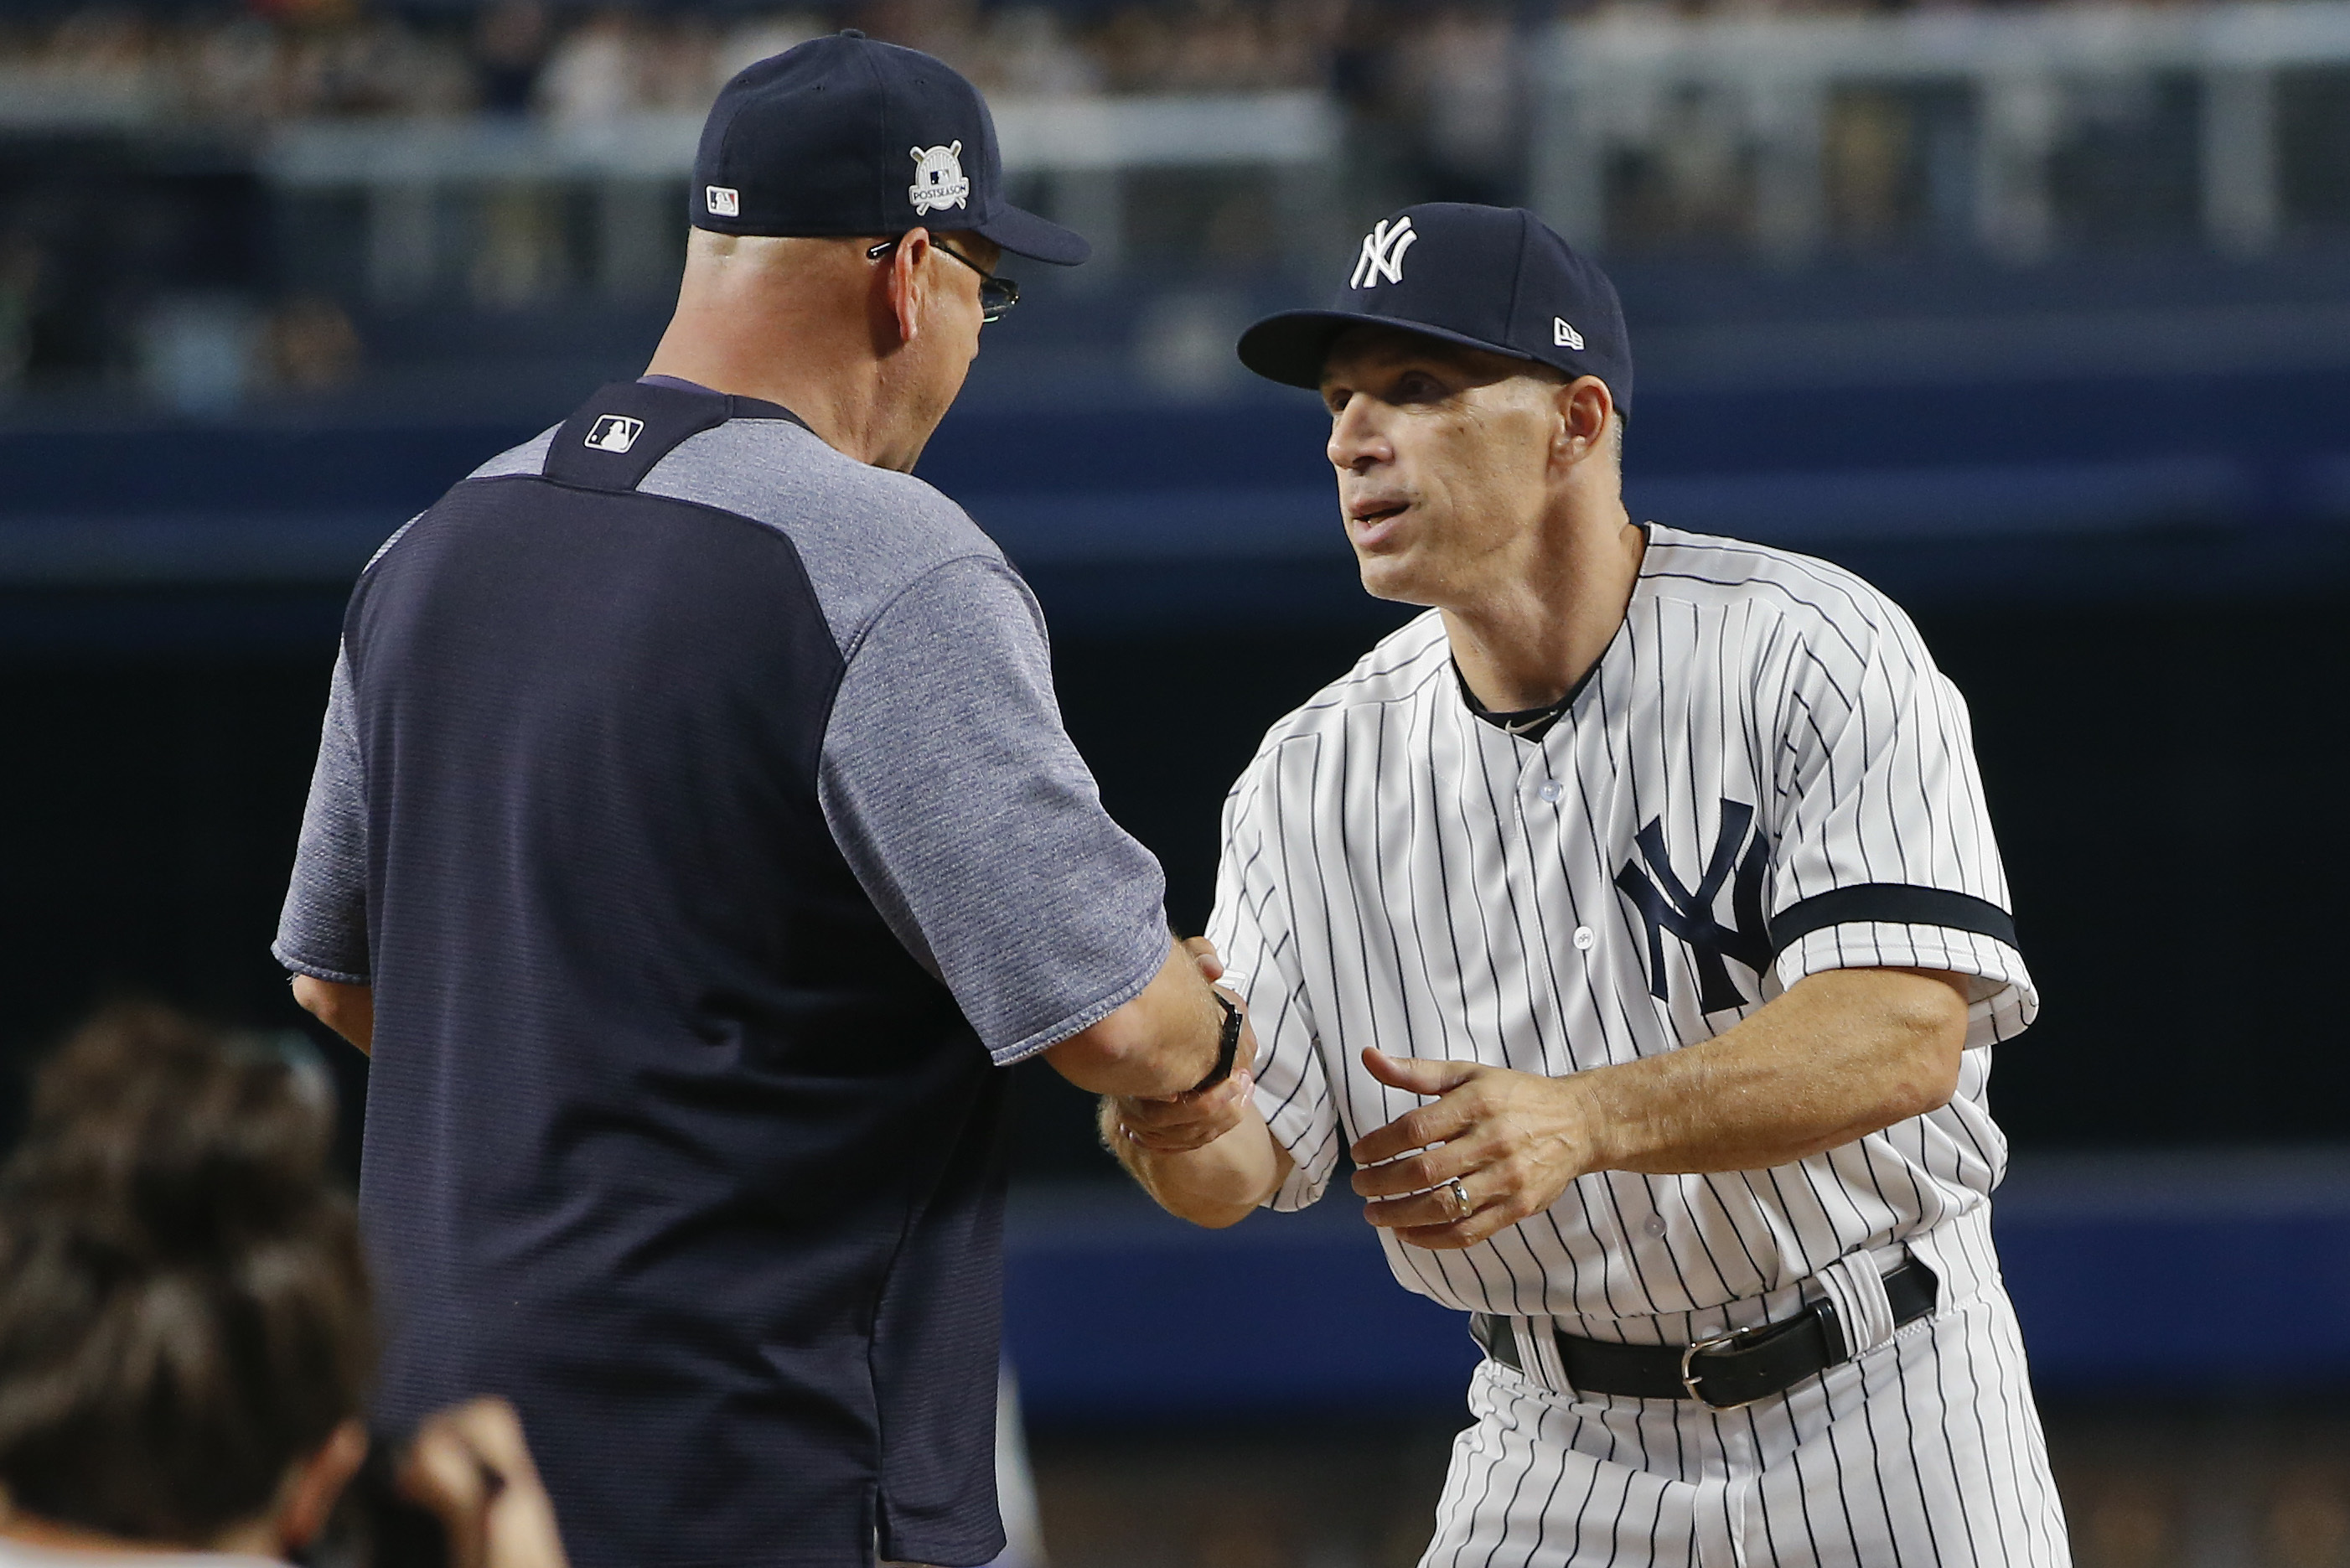 Girardi out as Yankees manager